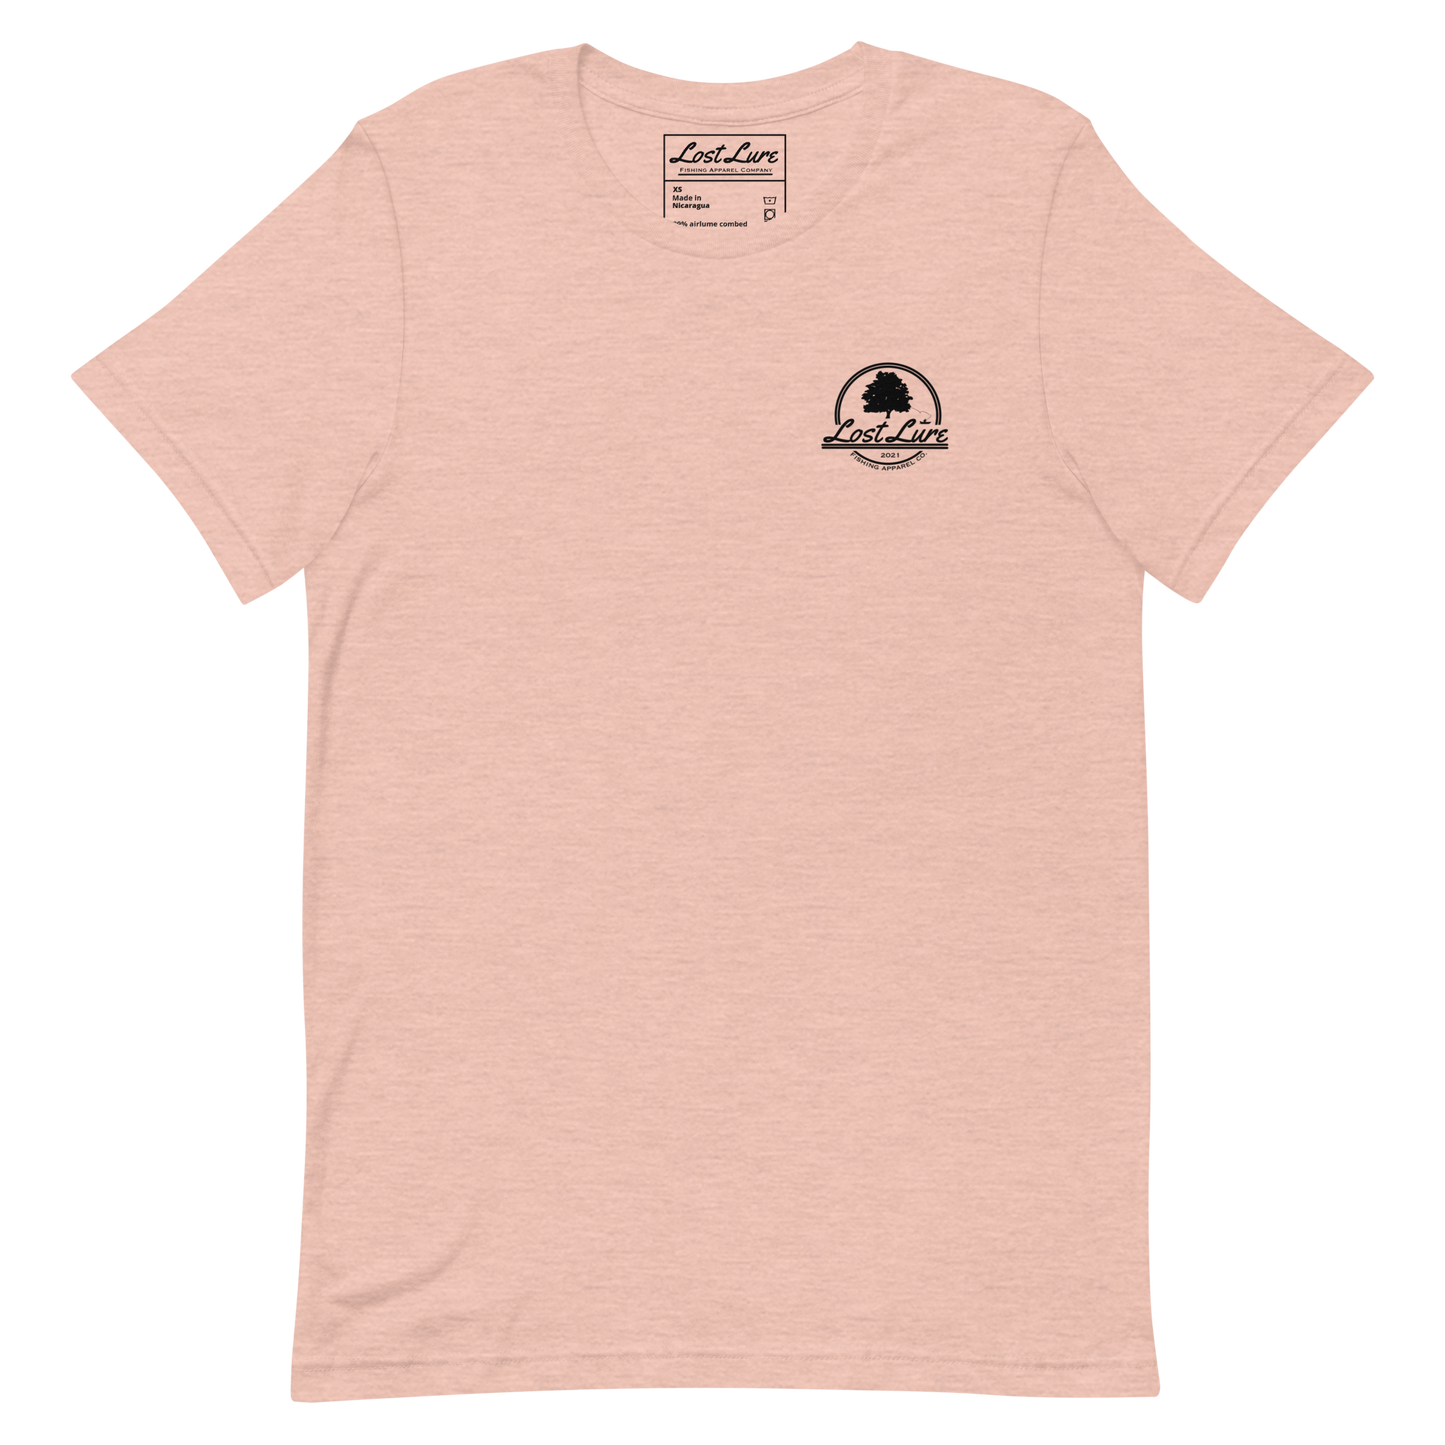 Cutthroat Trout fishing shirt. It’s an American traditional style design with a cutthroat trout and a dagger. The shirt reads Cutthroat trout, est. 2021, lost lure fishing apparel company. The front of the shirt has the lost lure logo. Salmon colored fishing shirt, front side